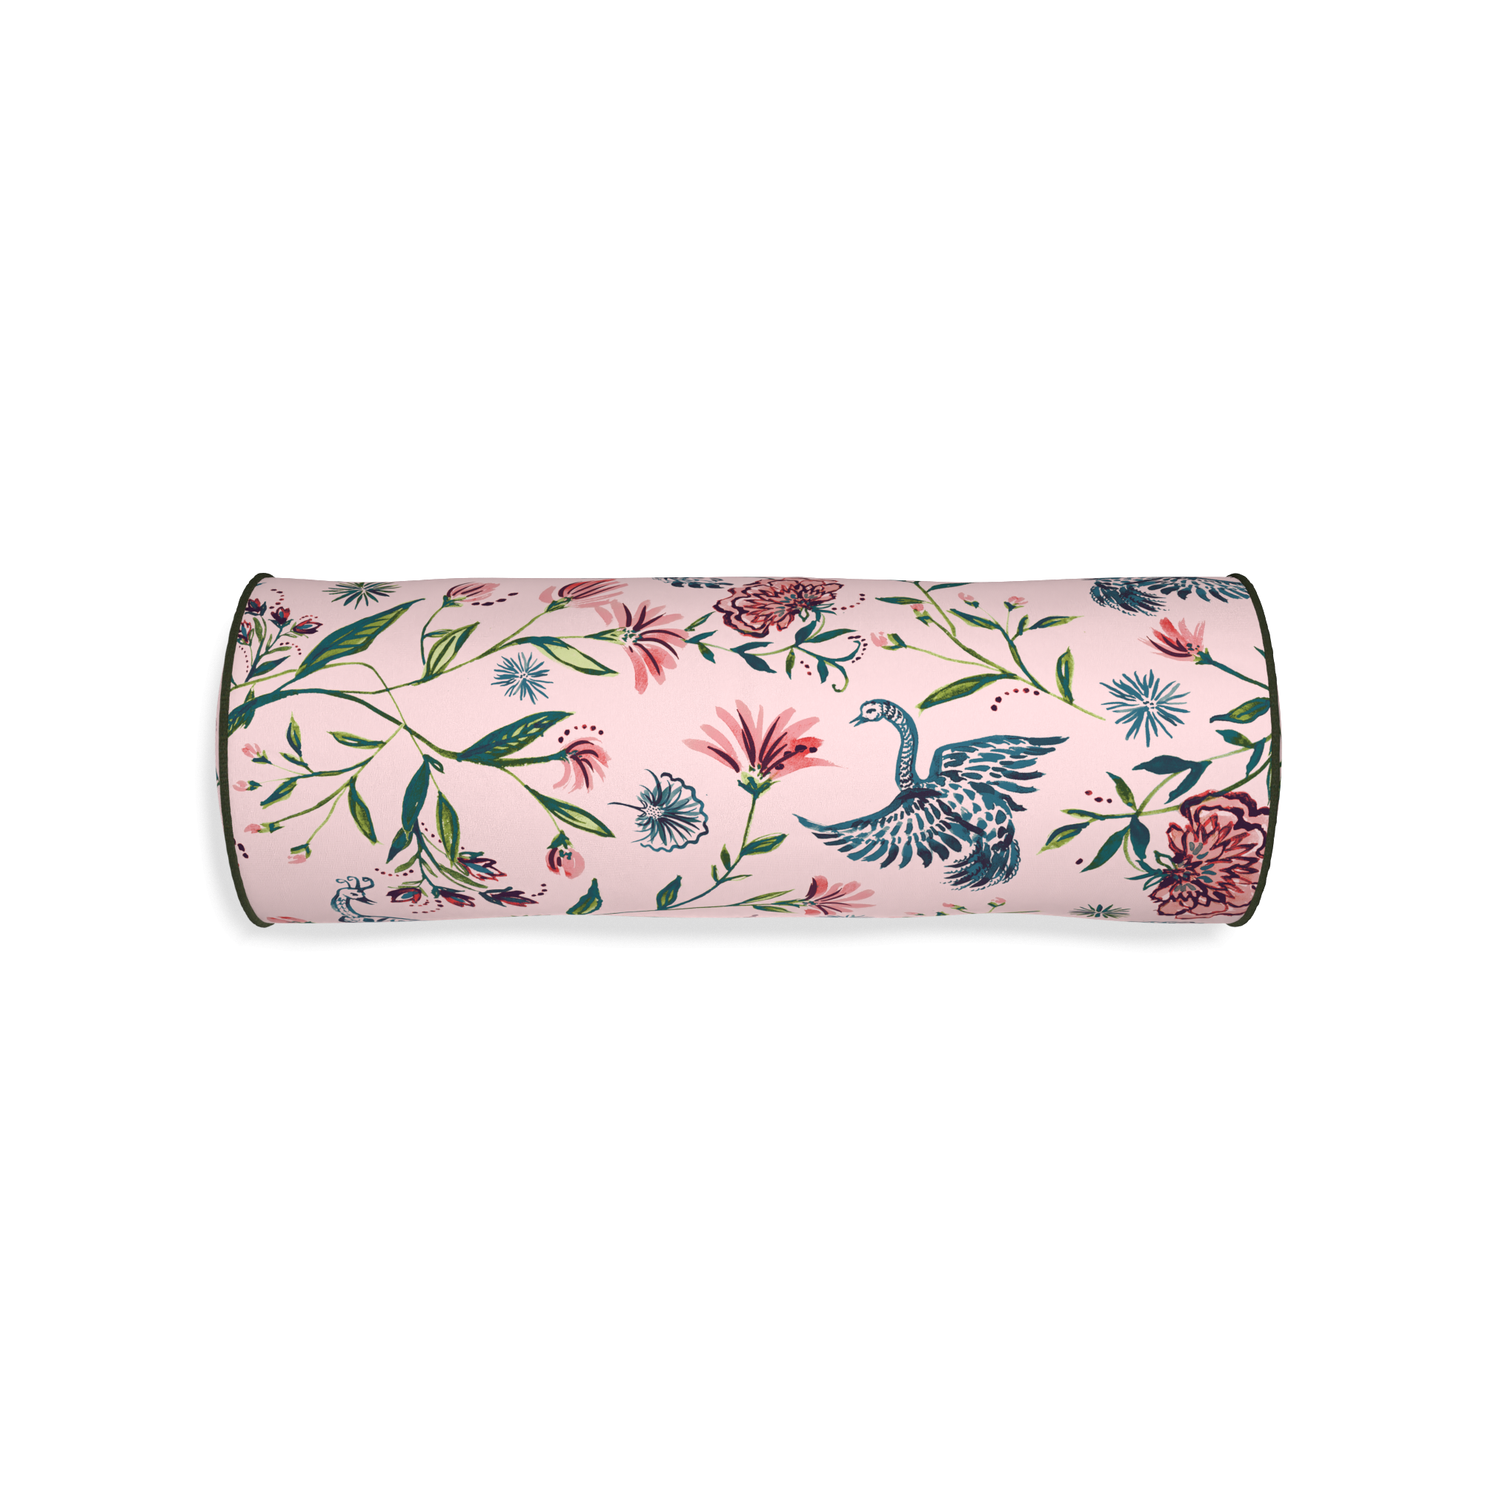 Bolster daphne rose custom rose chinoiseriepillow with f piping on white background